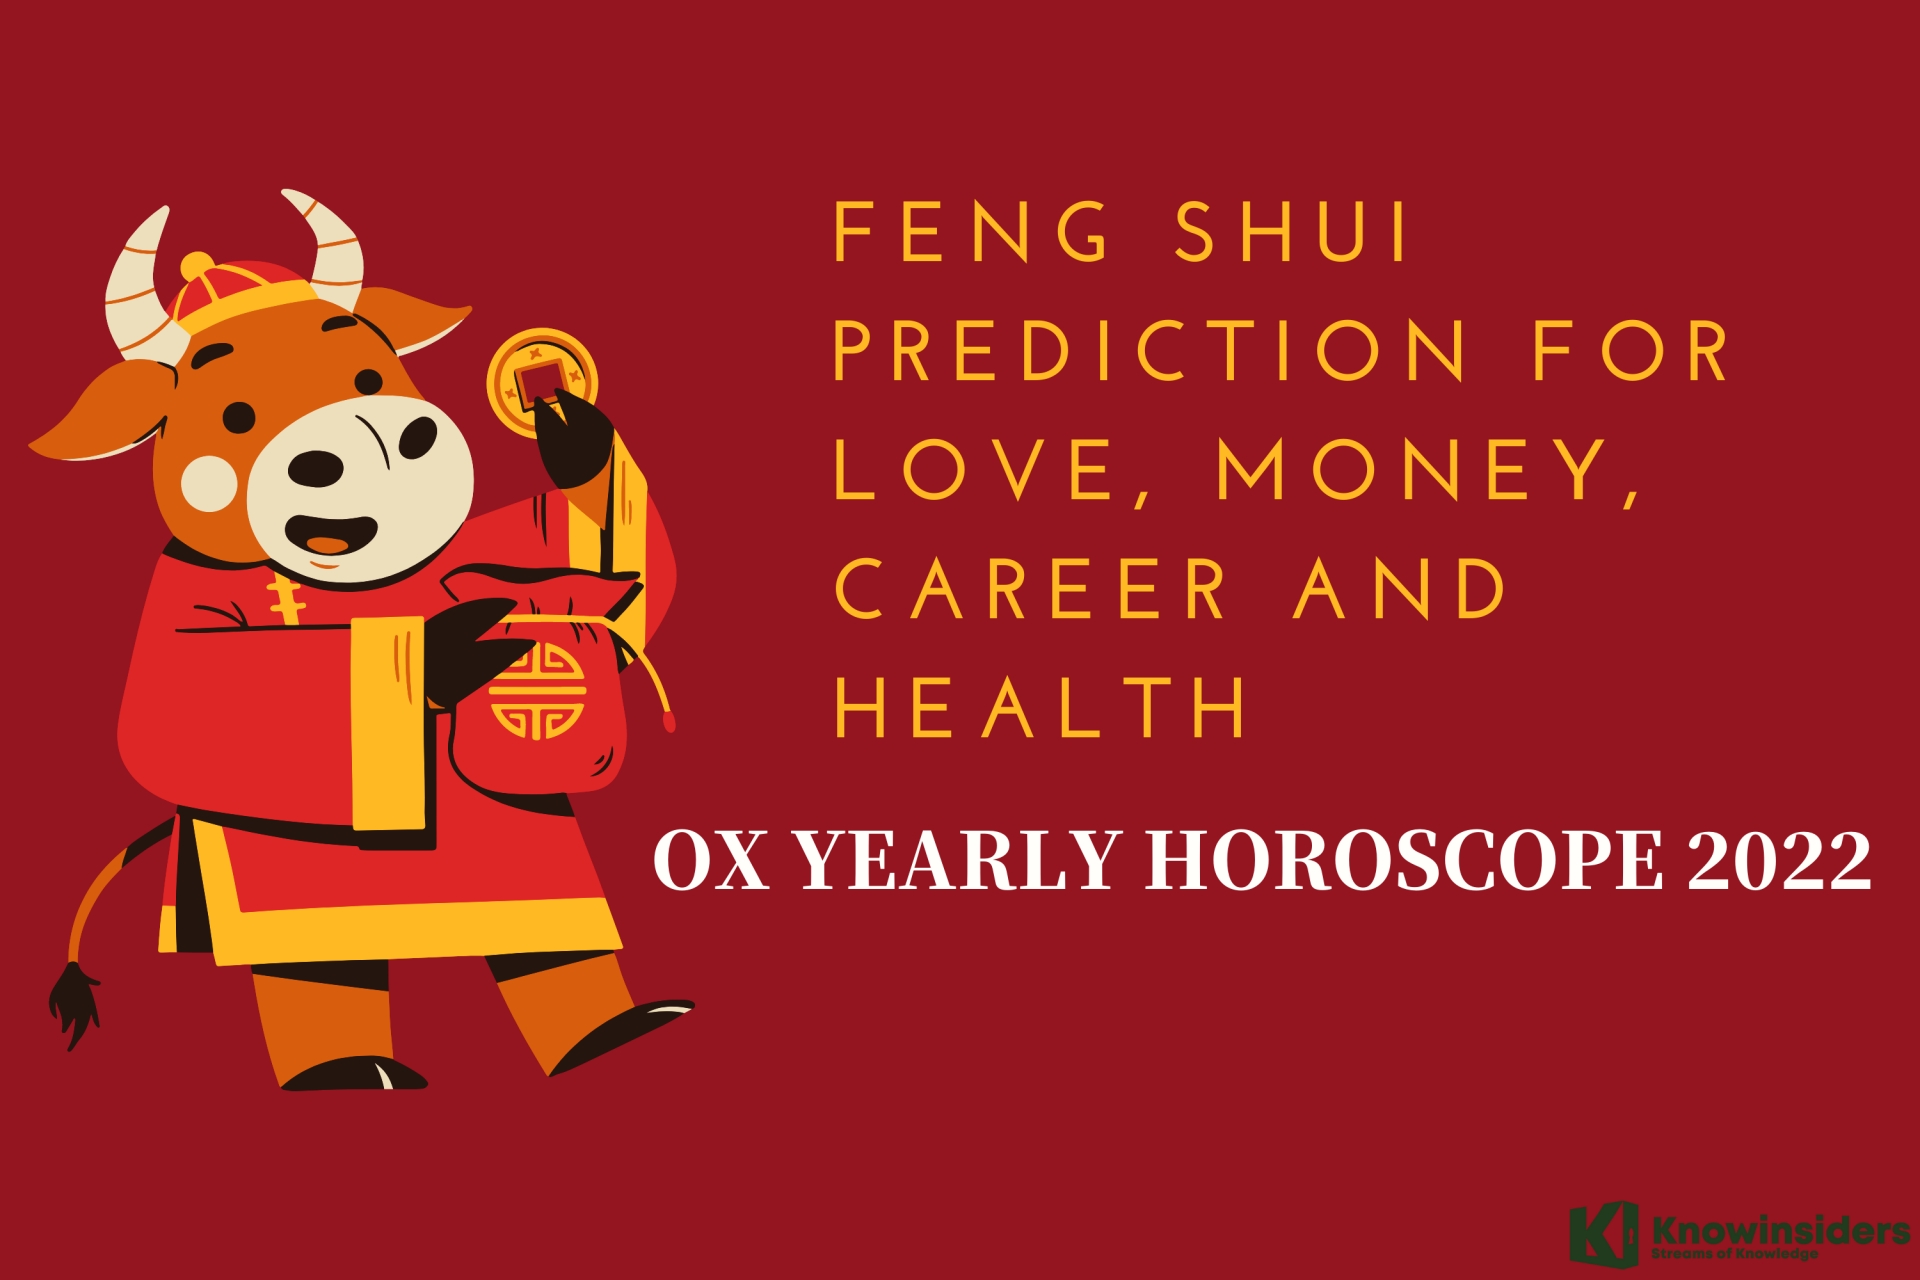 Ox Yearly Horoscope 2022 – Feng Shui Prediction for Love, Money, Career and Health